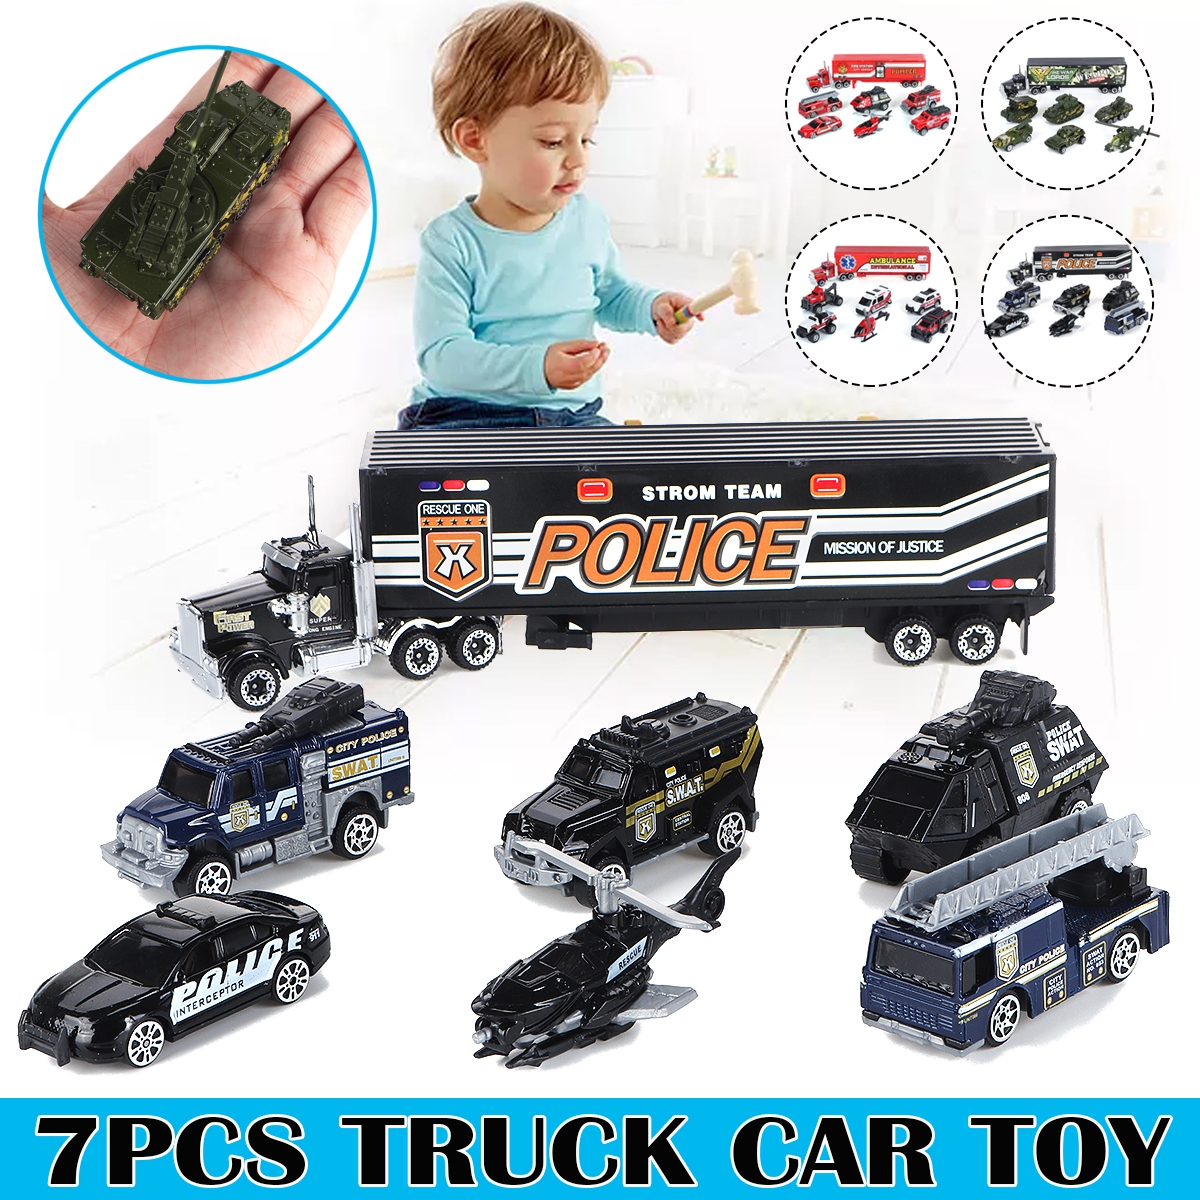 7 Pcs Alloy Diecast Truck Car Model Set Toy Vehicle for Kids Christmas Gift